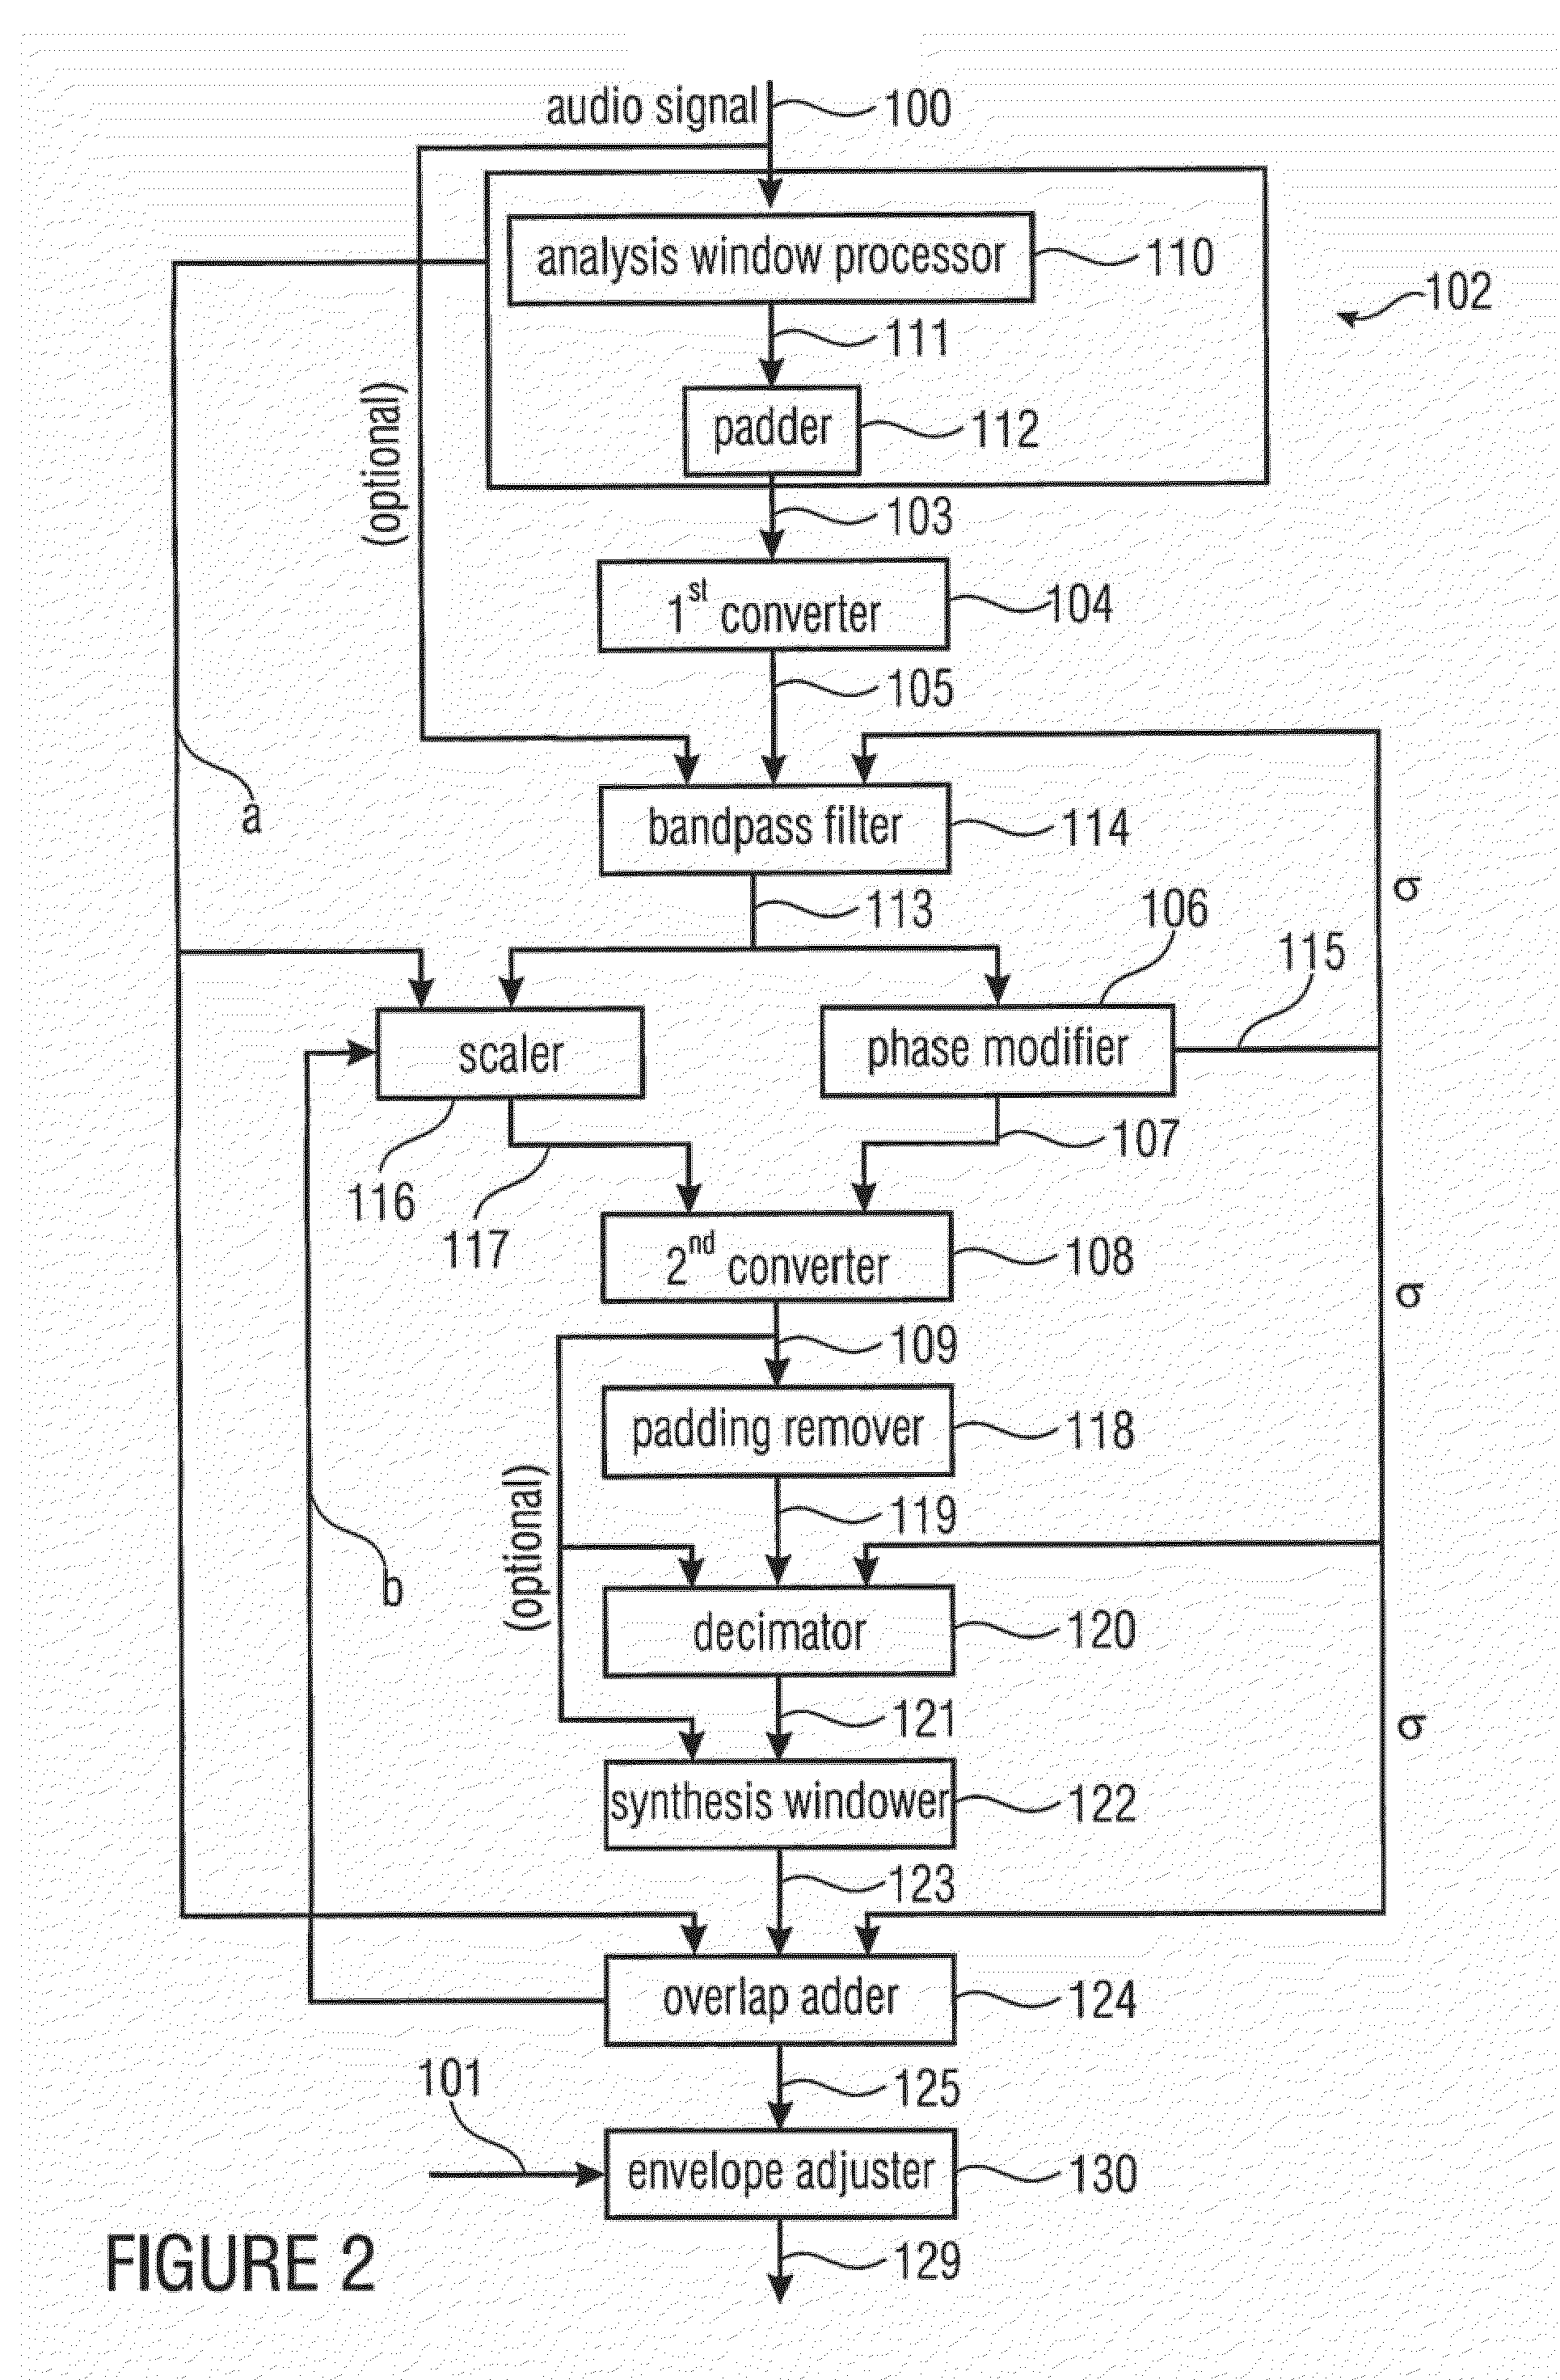 Device and Method for Manipulating an Audio Signal